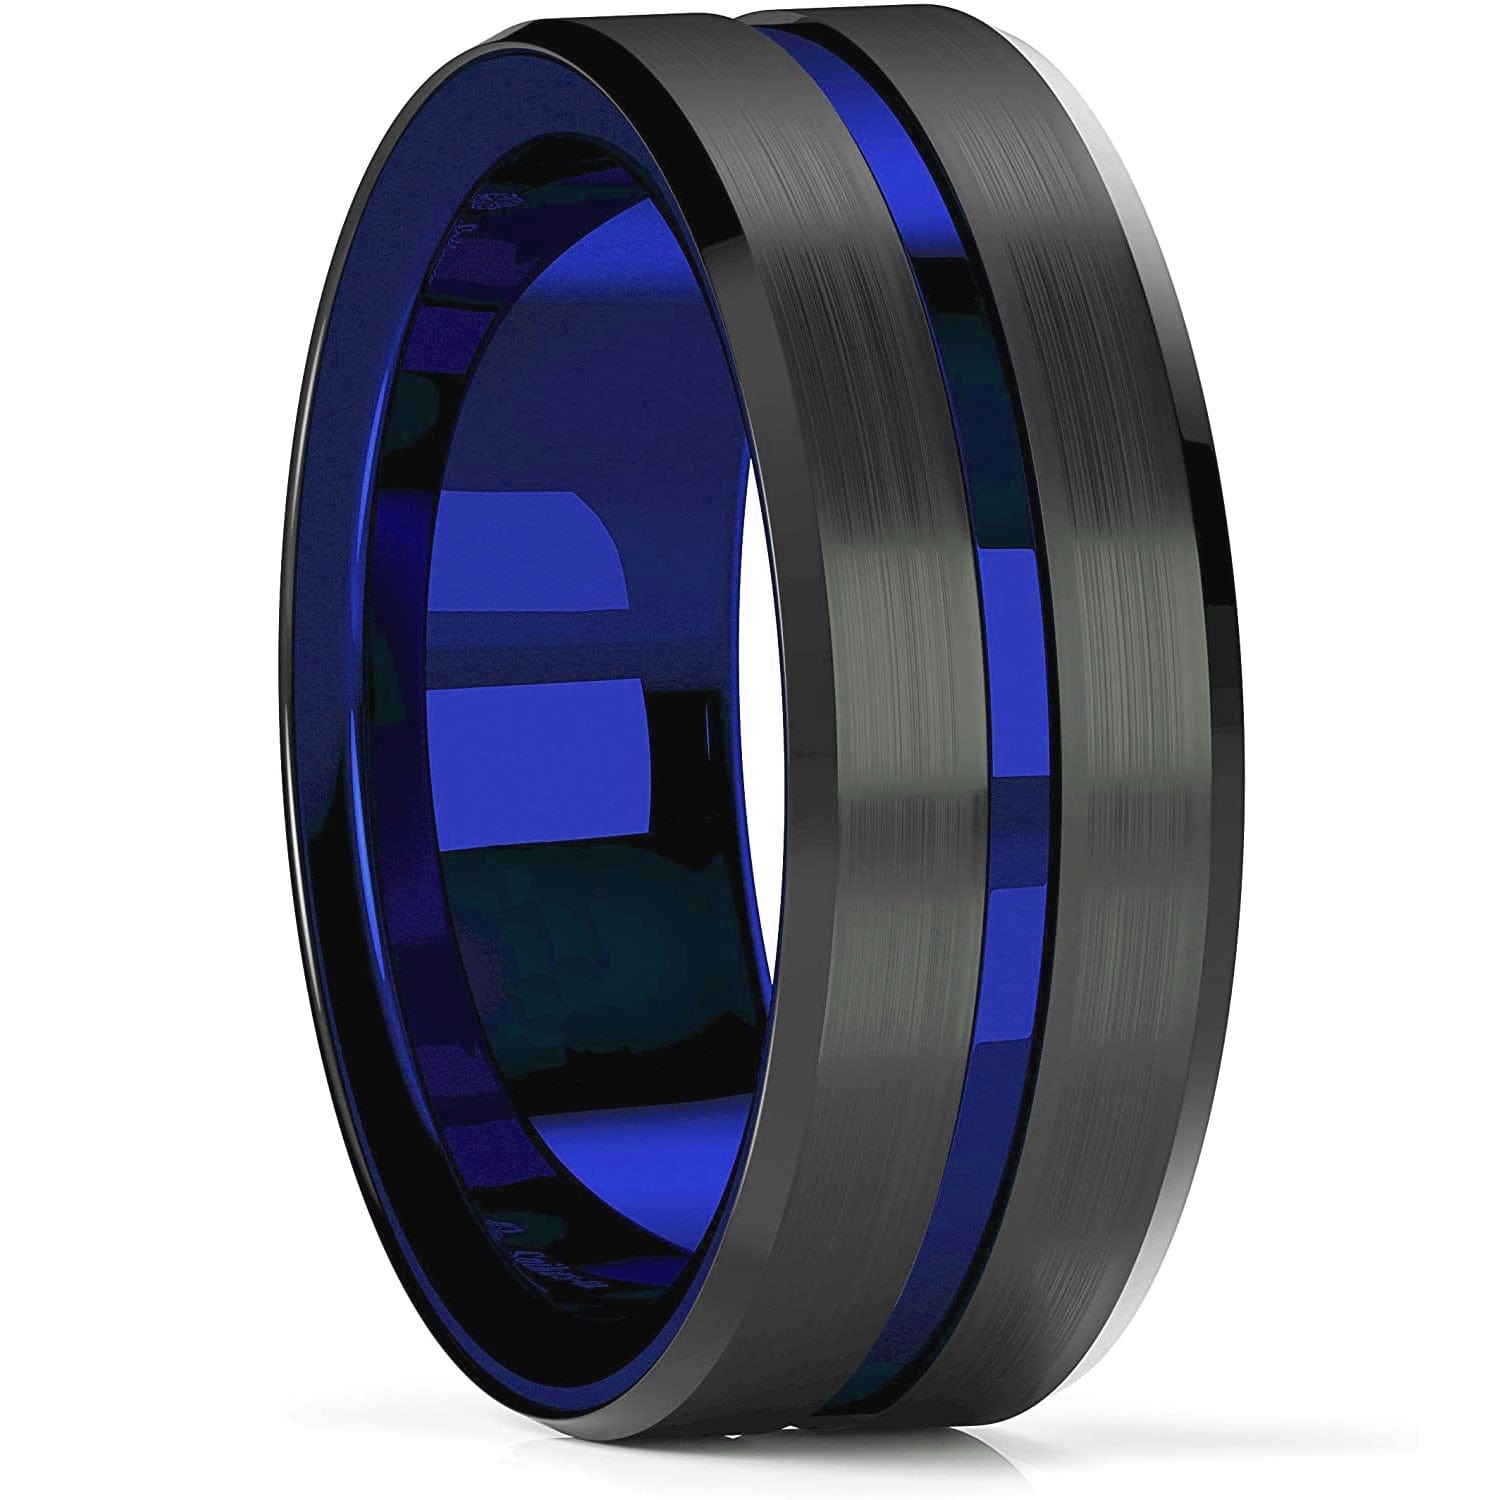 VVS Jewelry hip hop jewelry Style 3 / 9 8MM Tungsten Carbide Ring  Matte Finish Beveled Polished Edge Comfort Fit